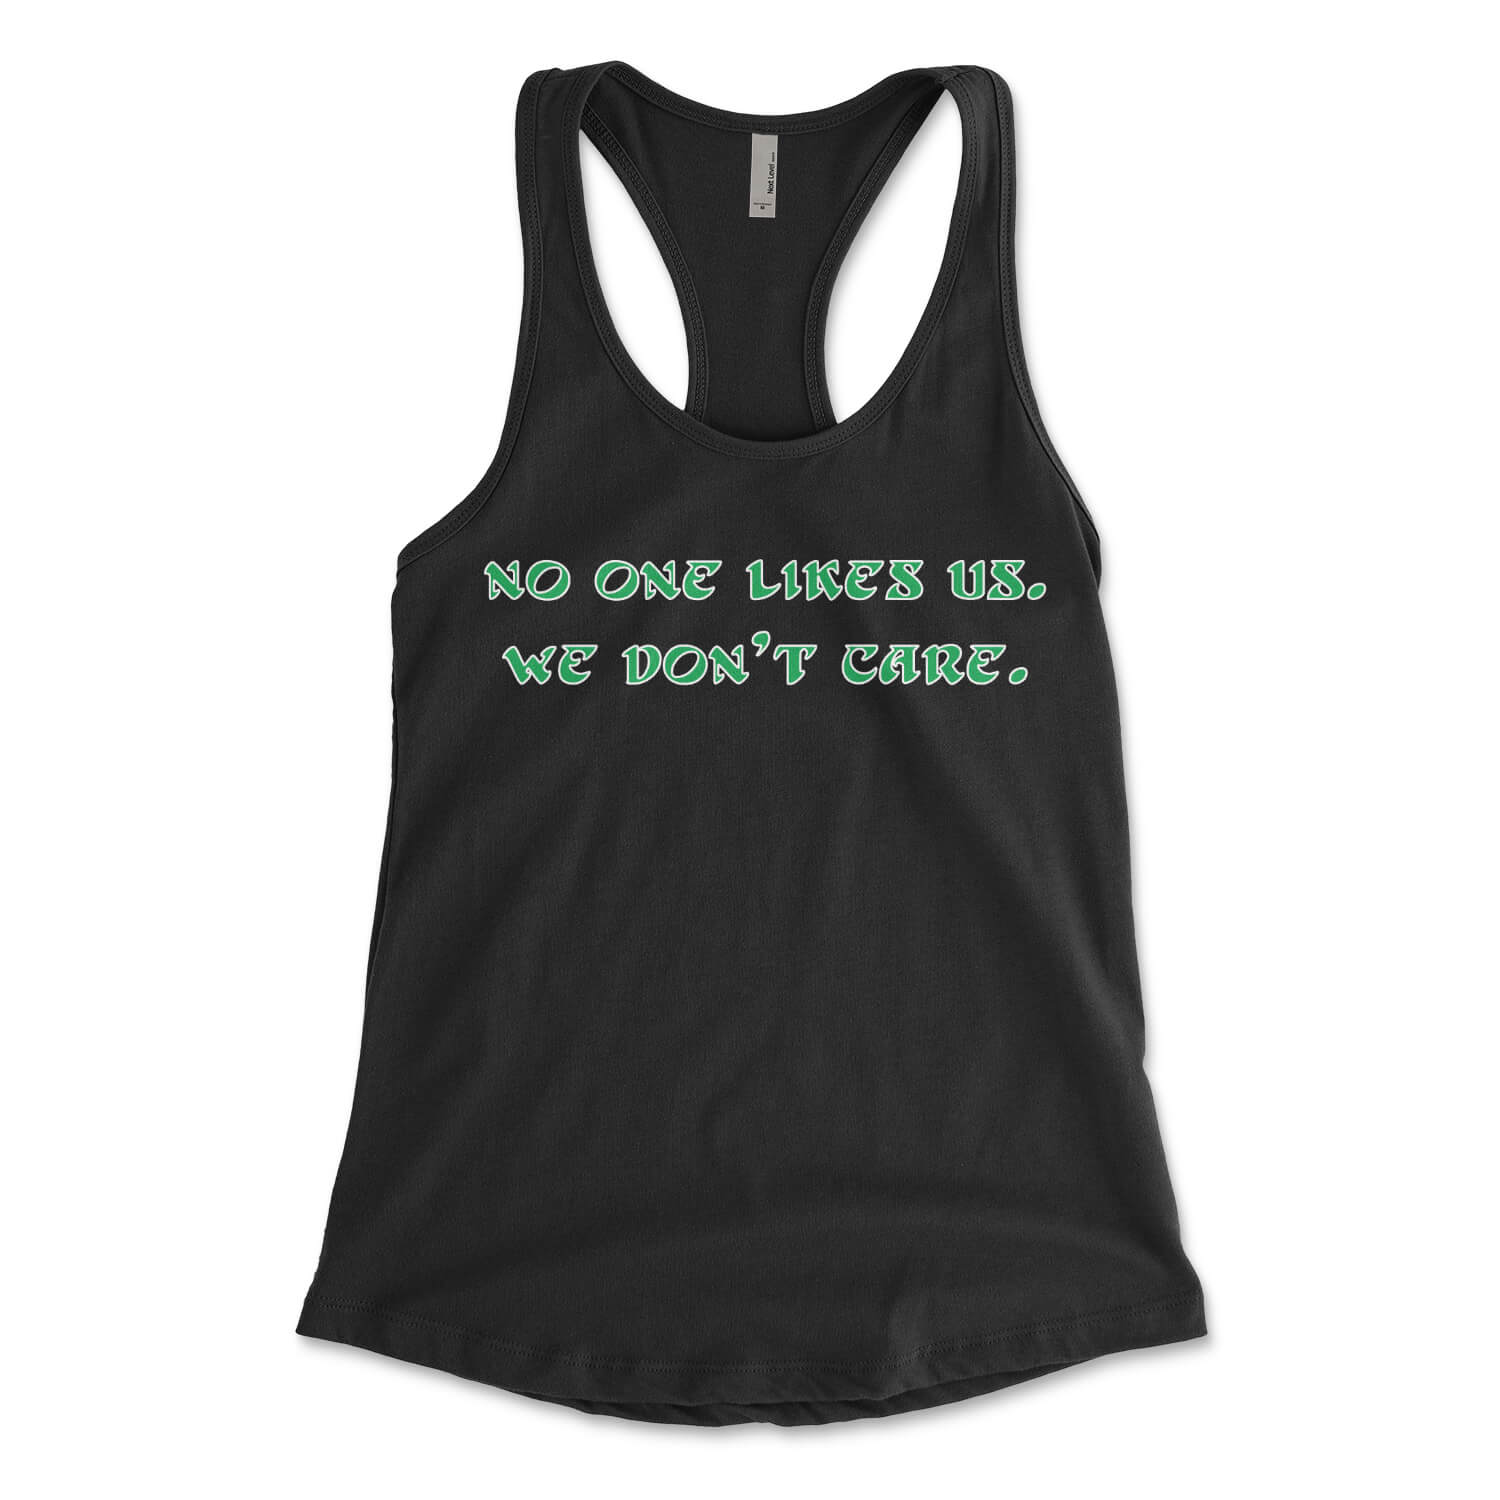 Philadelphia Eagles no one likes us we don't care black womens racerback tank top from Phillygoat